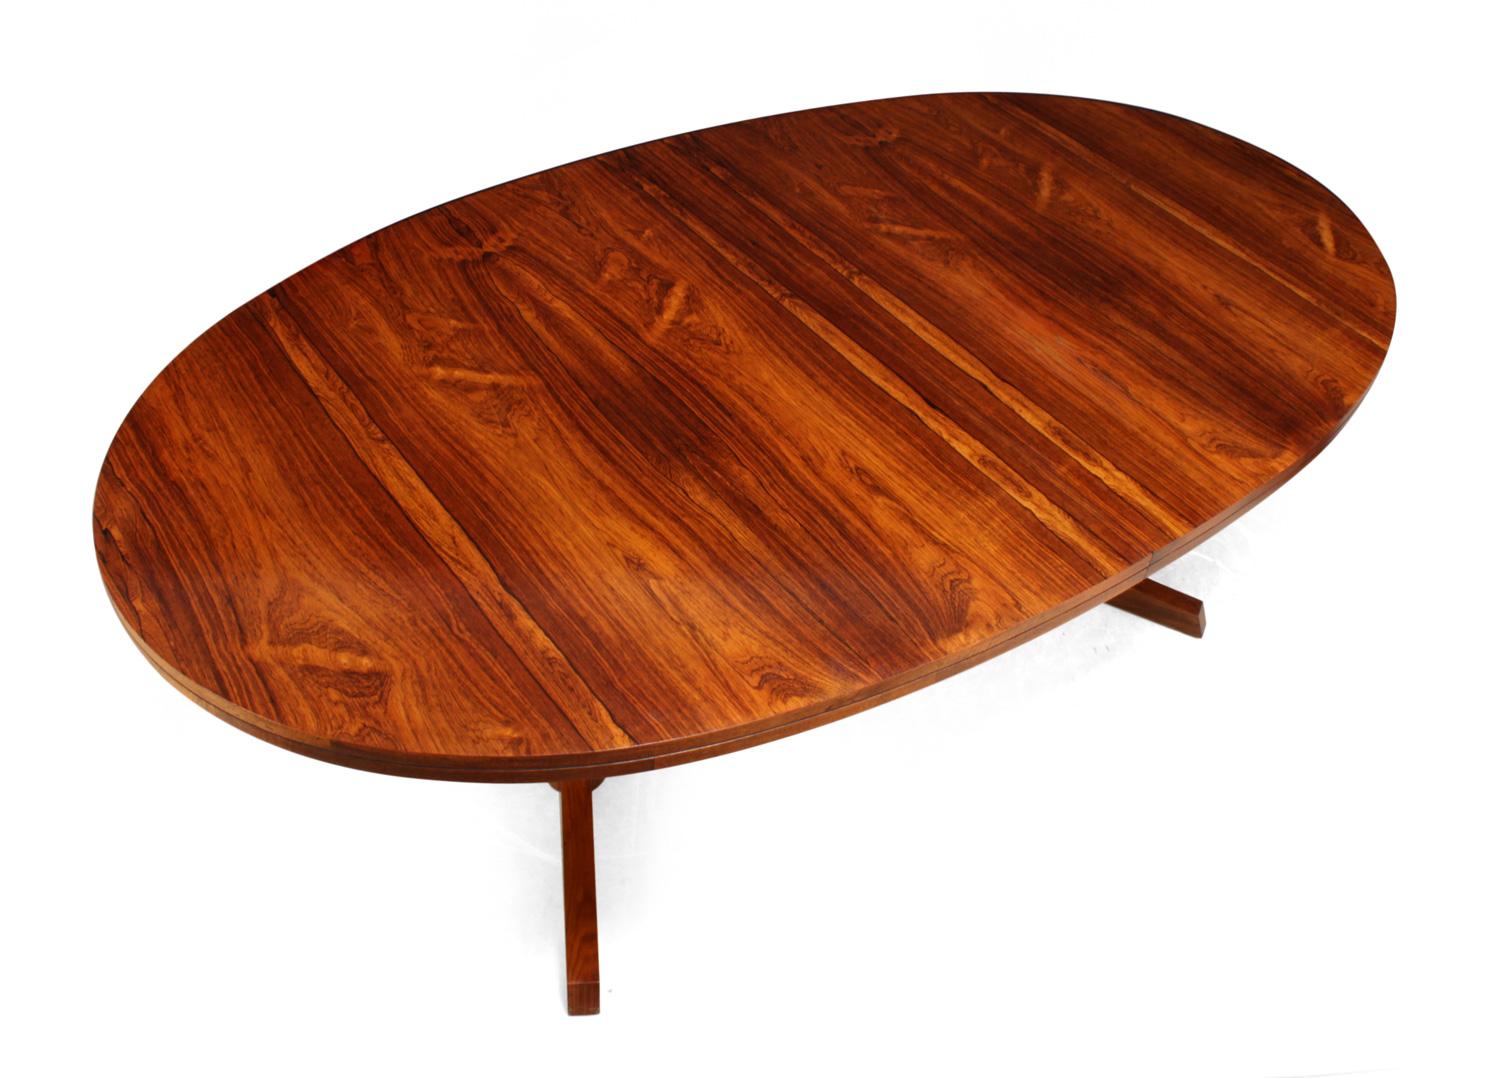 British Midcentury Dining Table by Robert Heritage